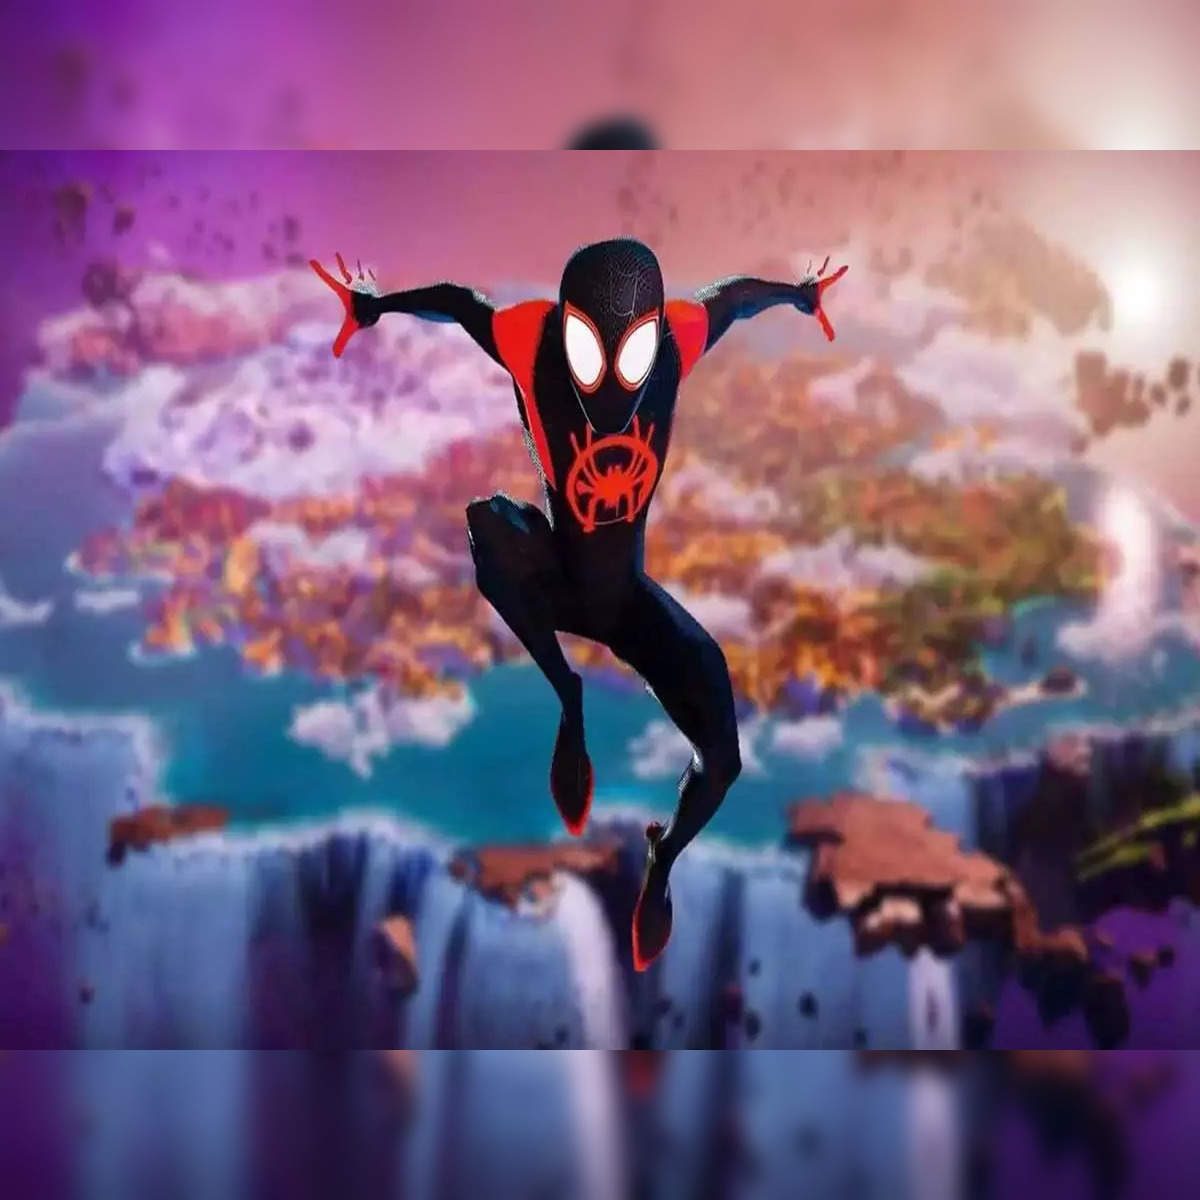 Across the Spider-Verse Cast & Character Guide